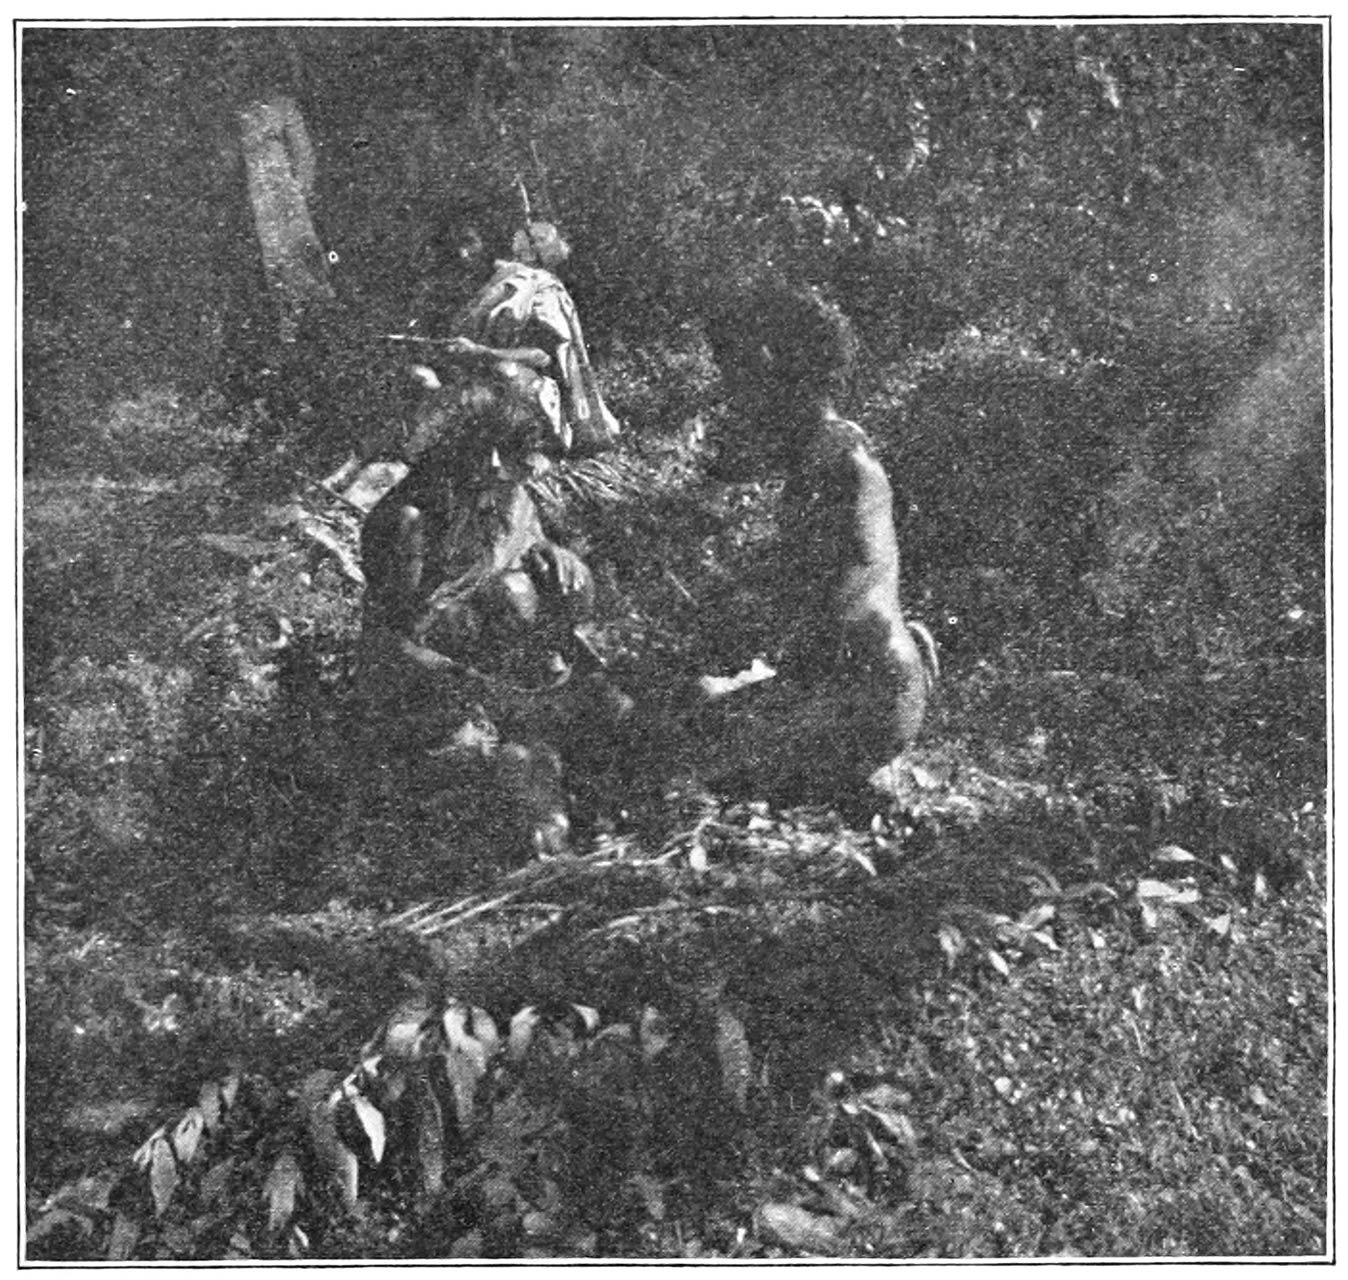 FIG. 40.—PUNATVAN AND PICHIEVAN CUTTING UP THE CALF. IN THE BACKGROUND KÒDRNER IS SHARPENING UP THE ‘KO.’